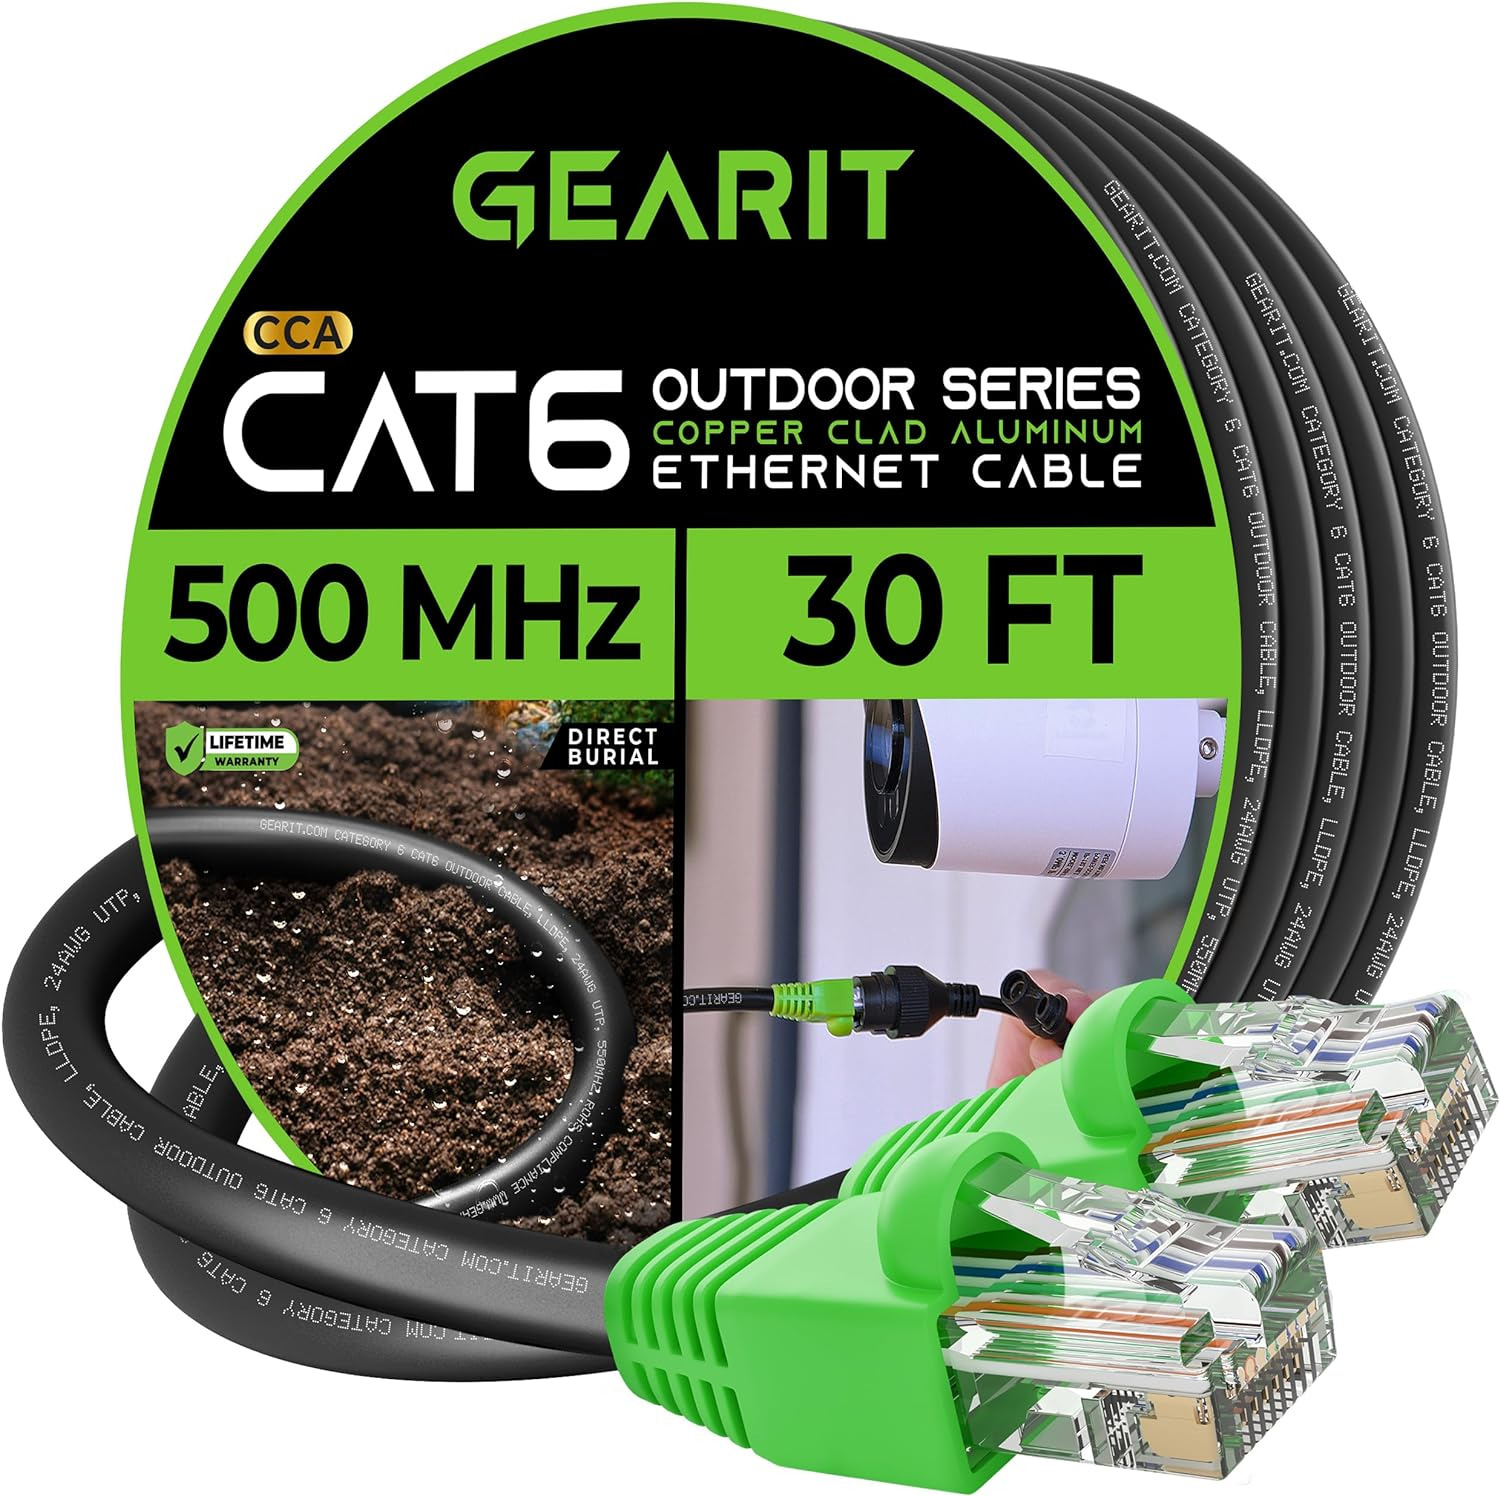 Cat6 Outdoor Ethernet Cable (30 Feet) CCA Copper Clad, Waterproof, Direct Burial